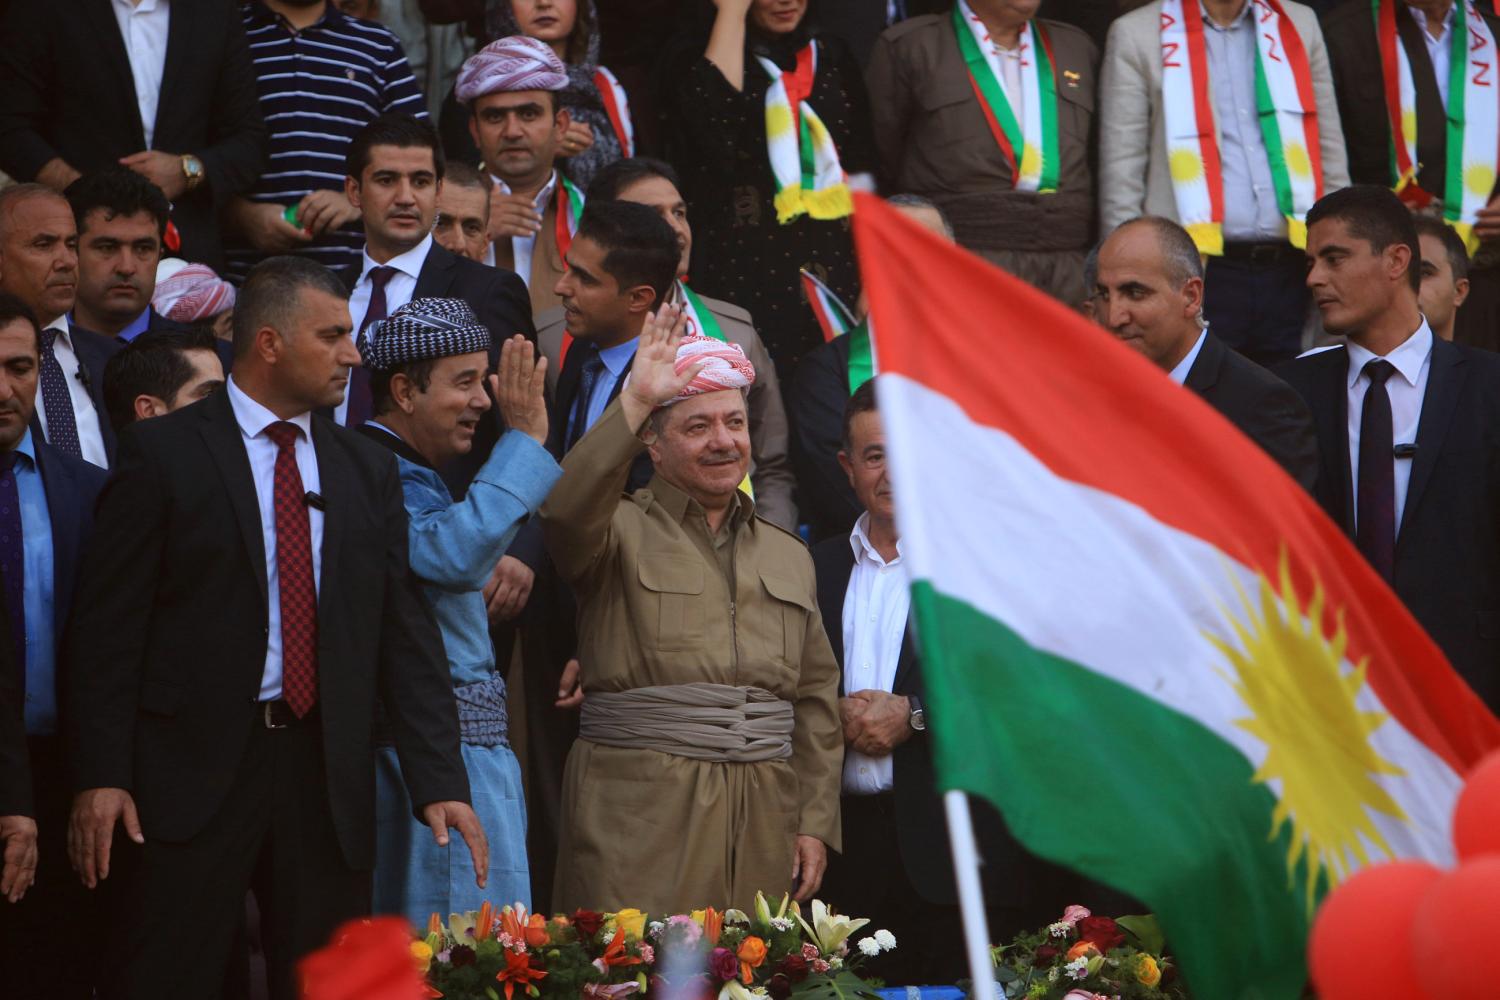 Iraqi Kurdish President Masoud Barzani salutes the crowd while attending a rally to show their support for the upcoming September 25th independence referendum in Duhuk, Iraq September 16, 2017.